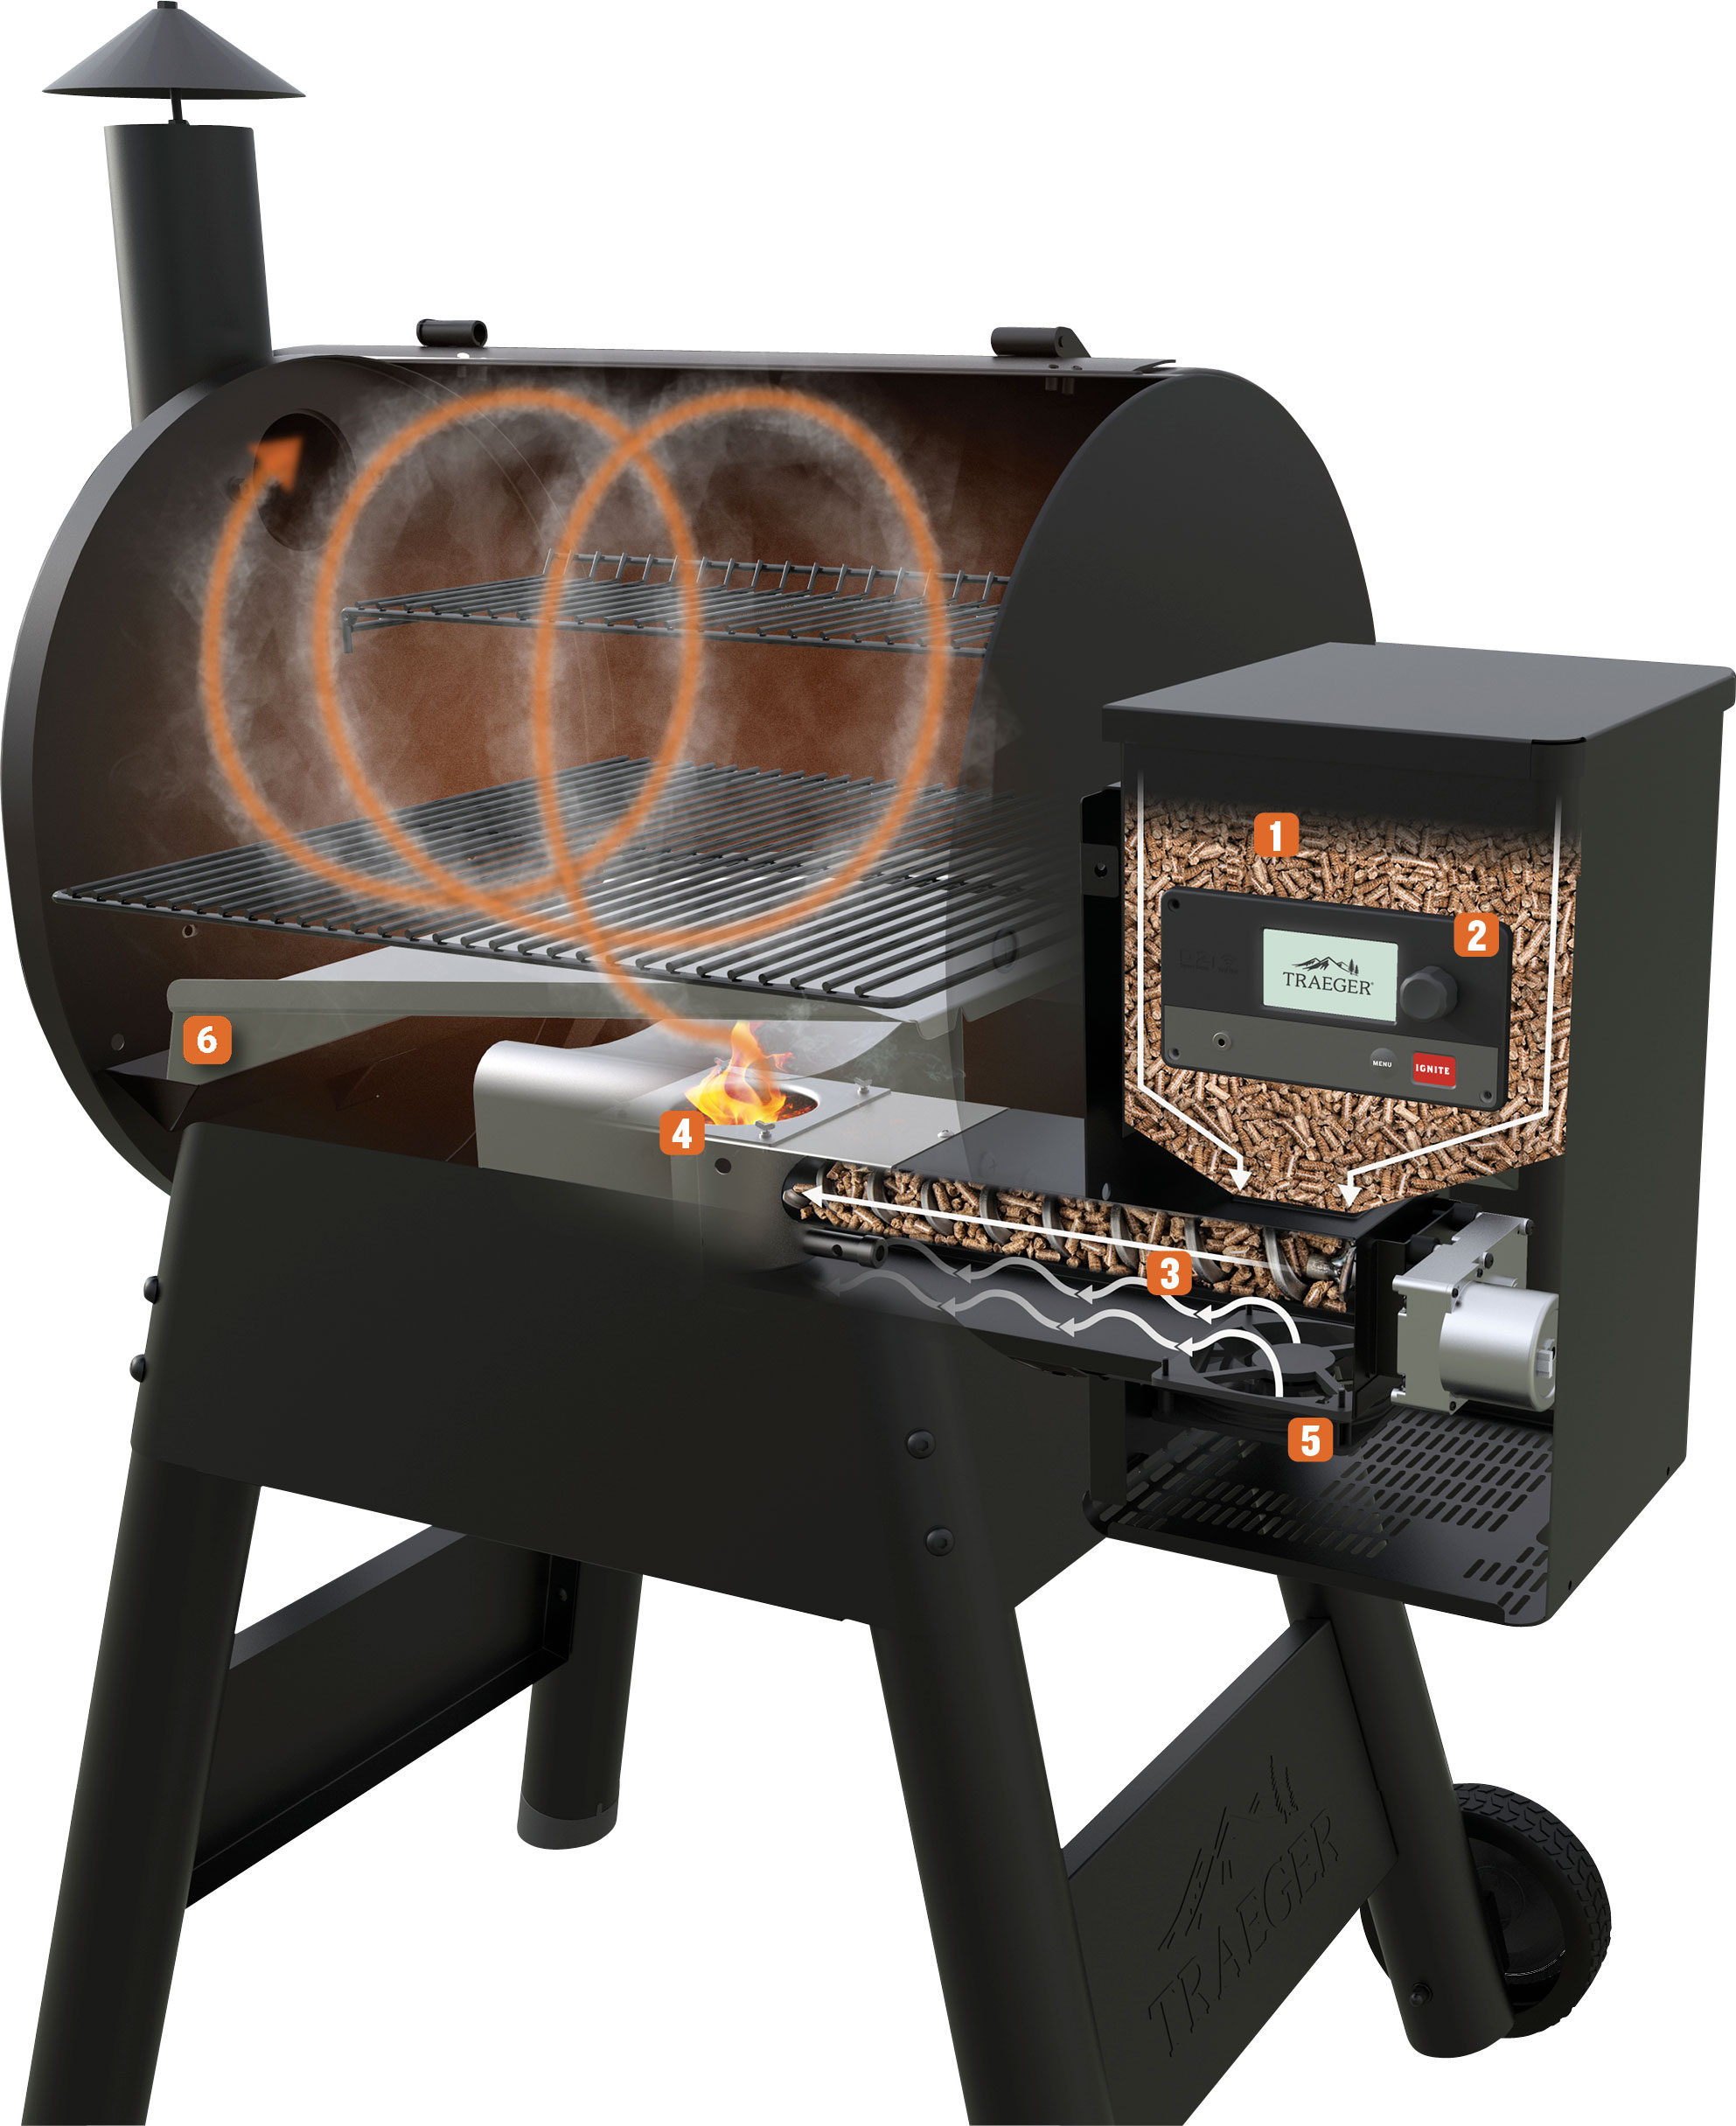 TIMBERLINE 850 - Traeger - TRAEGER - Grily - chcigril.cz